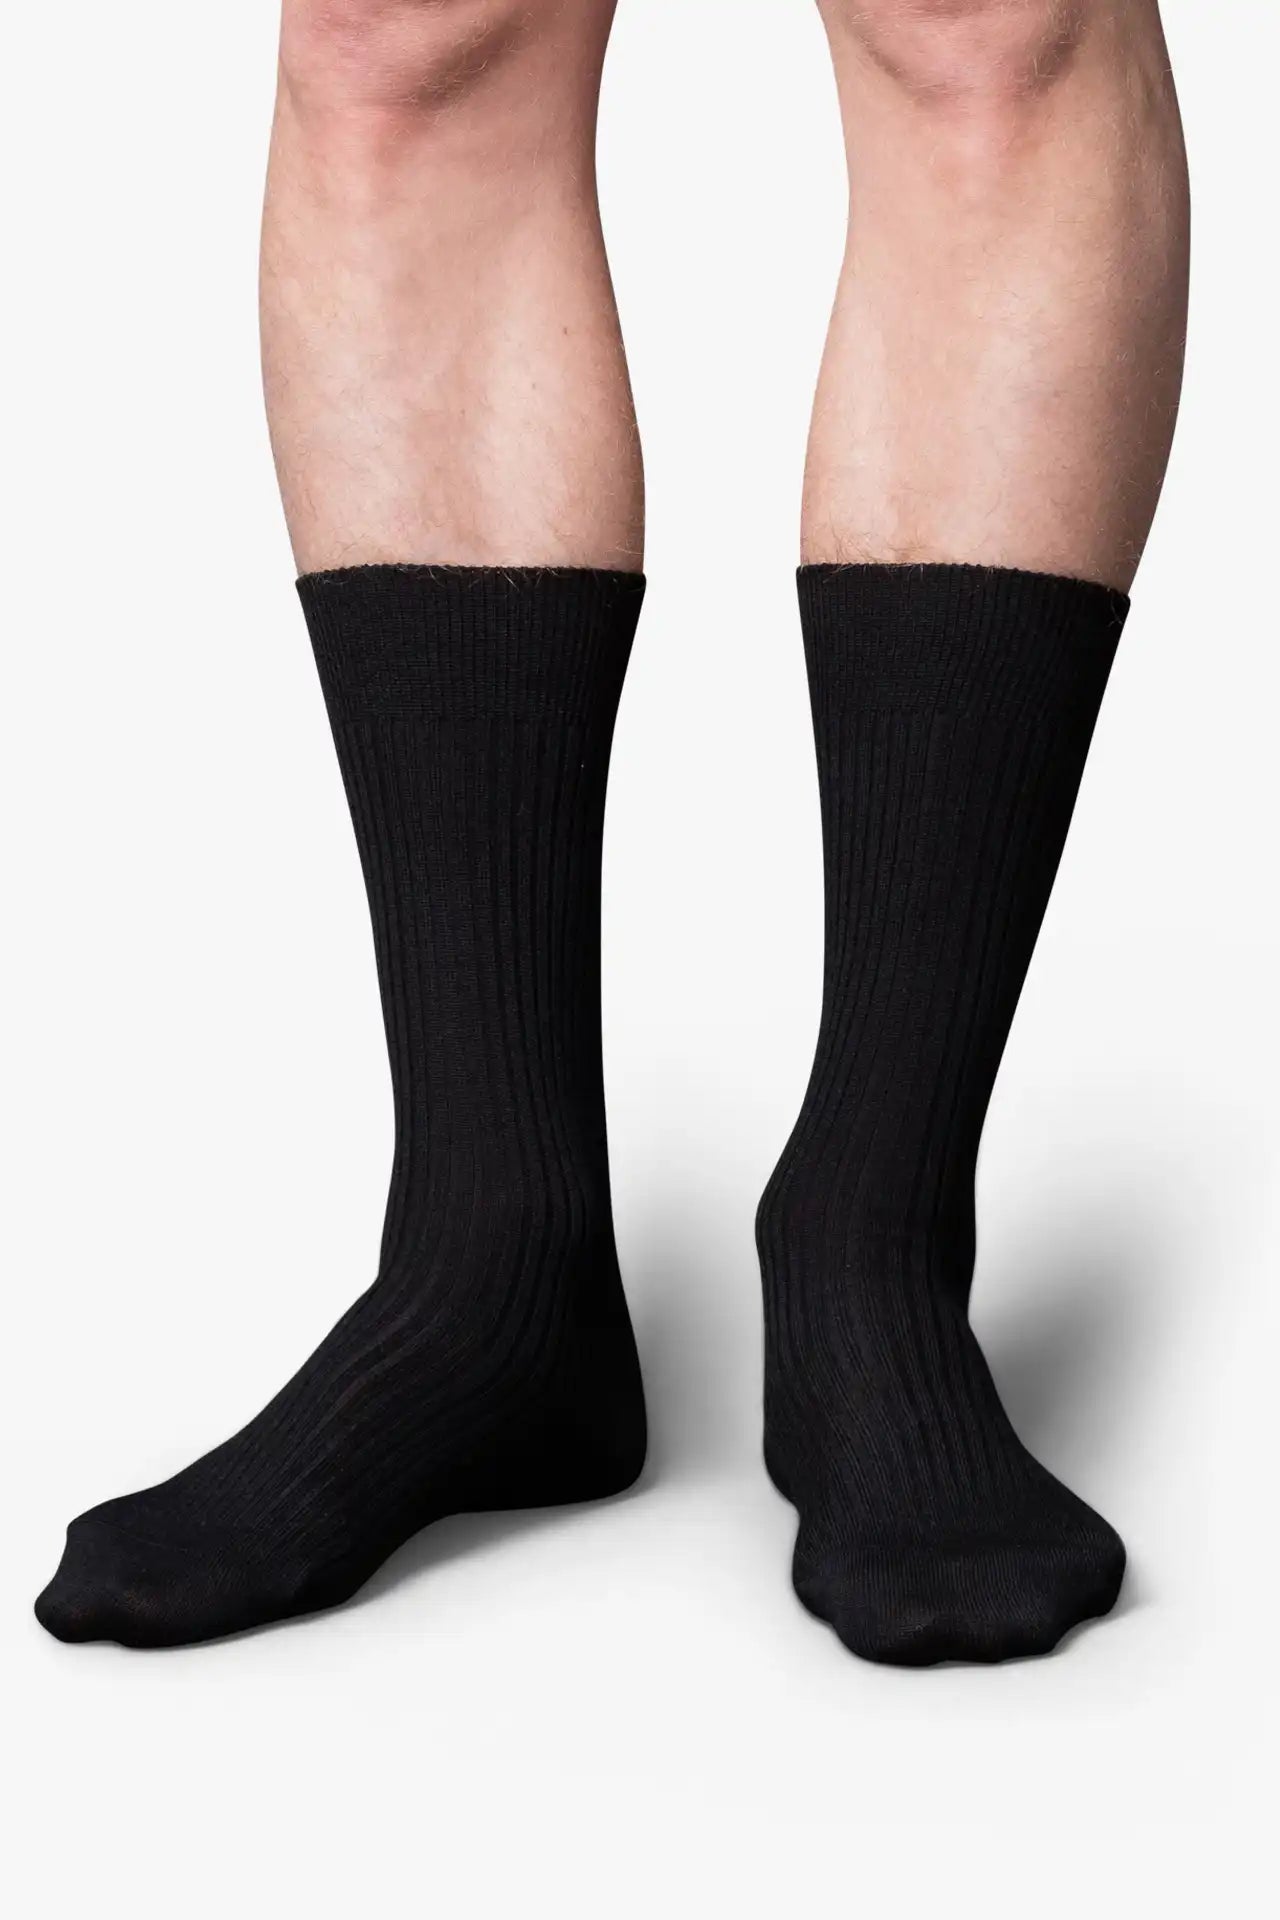 Black dress socks in merino wool. Swedish design by once a day and produced by glenn clyde. Can we washed in warm water without shrinking.